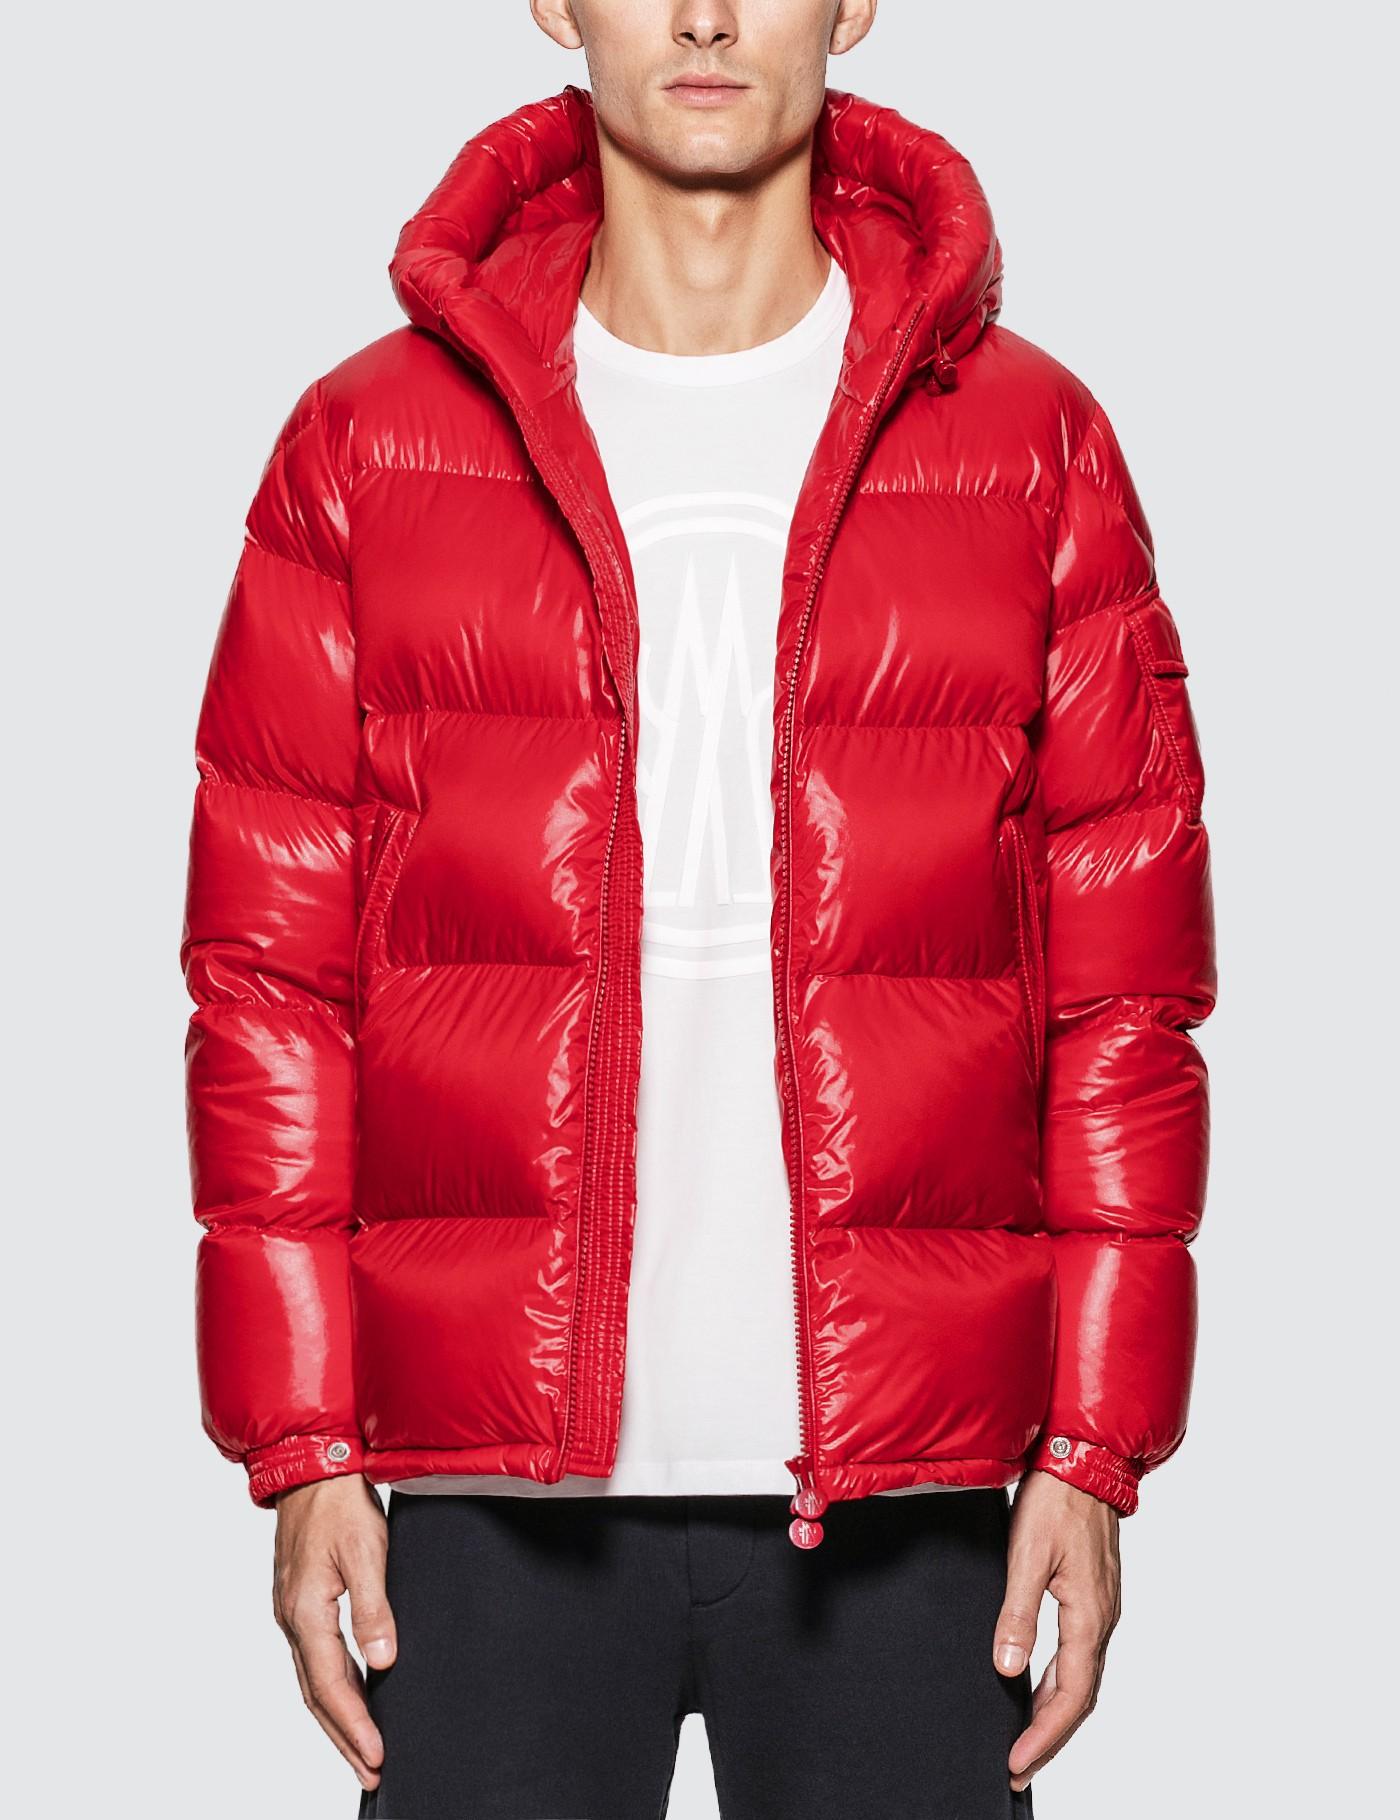 Moncler Synthetic Ecrins Down Jacket in Red for Men - Lyst